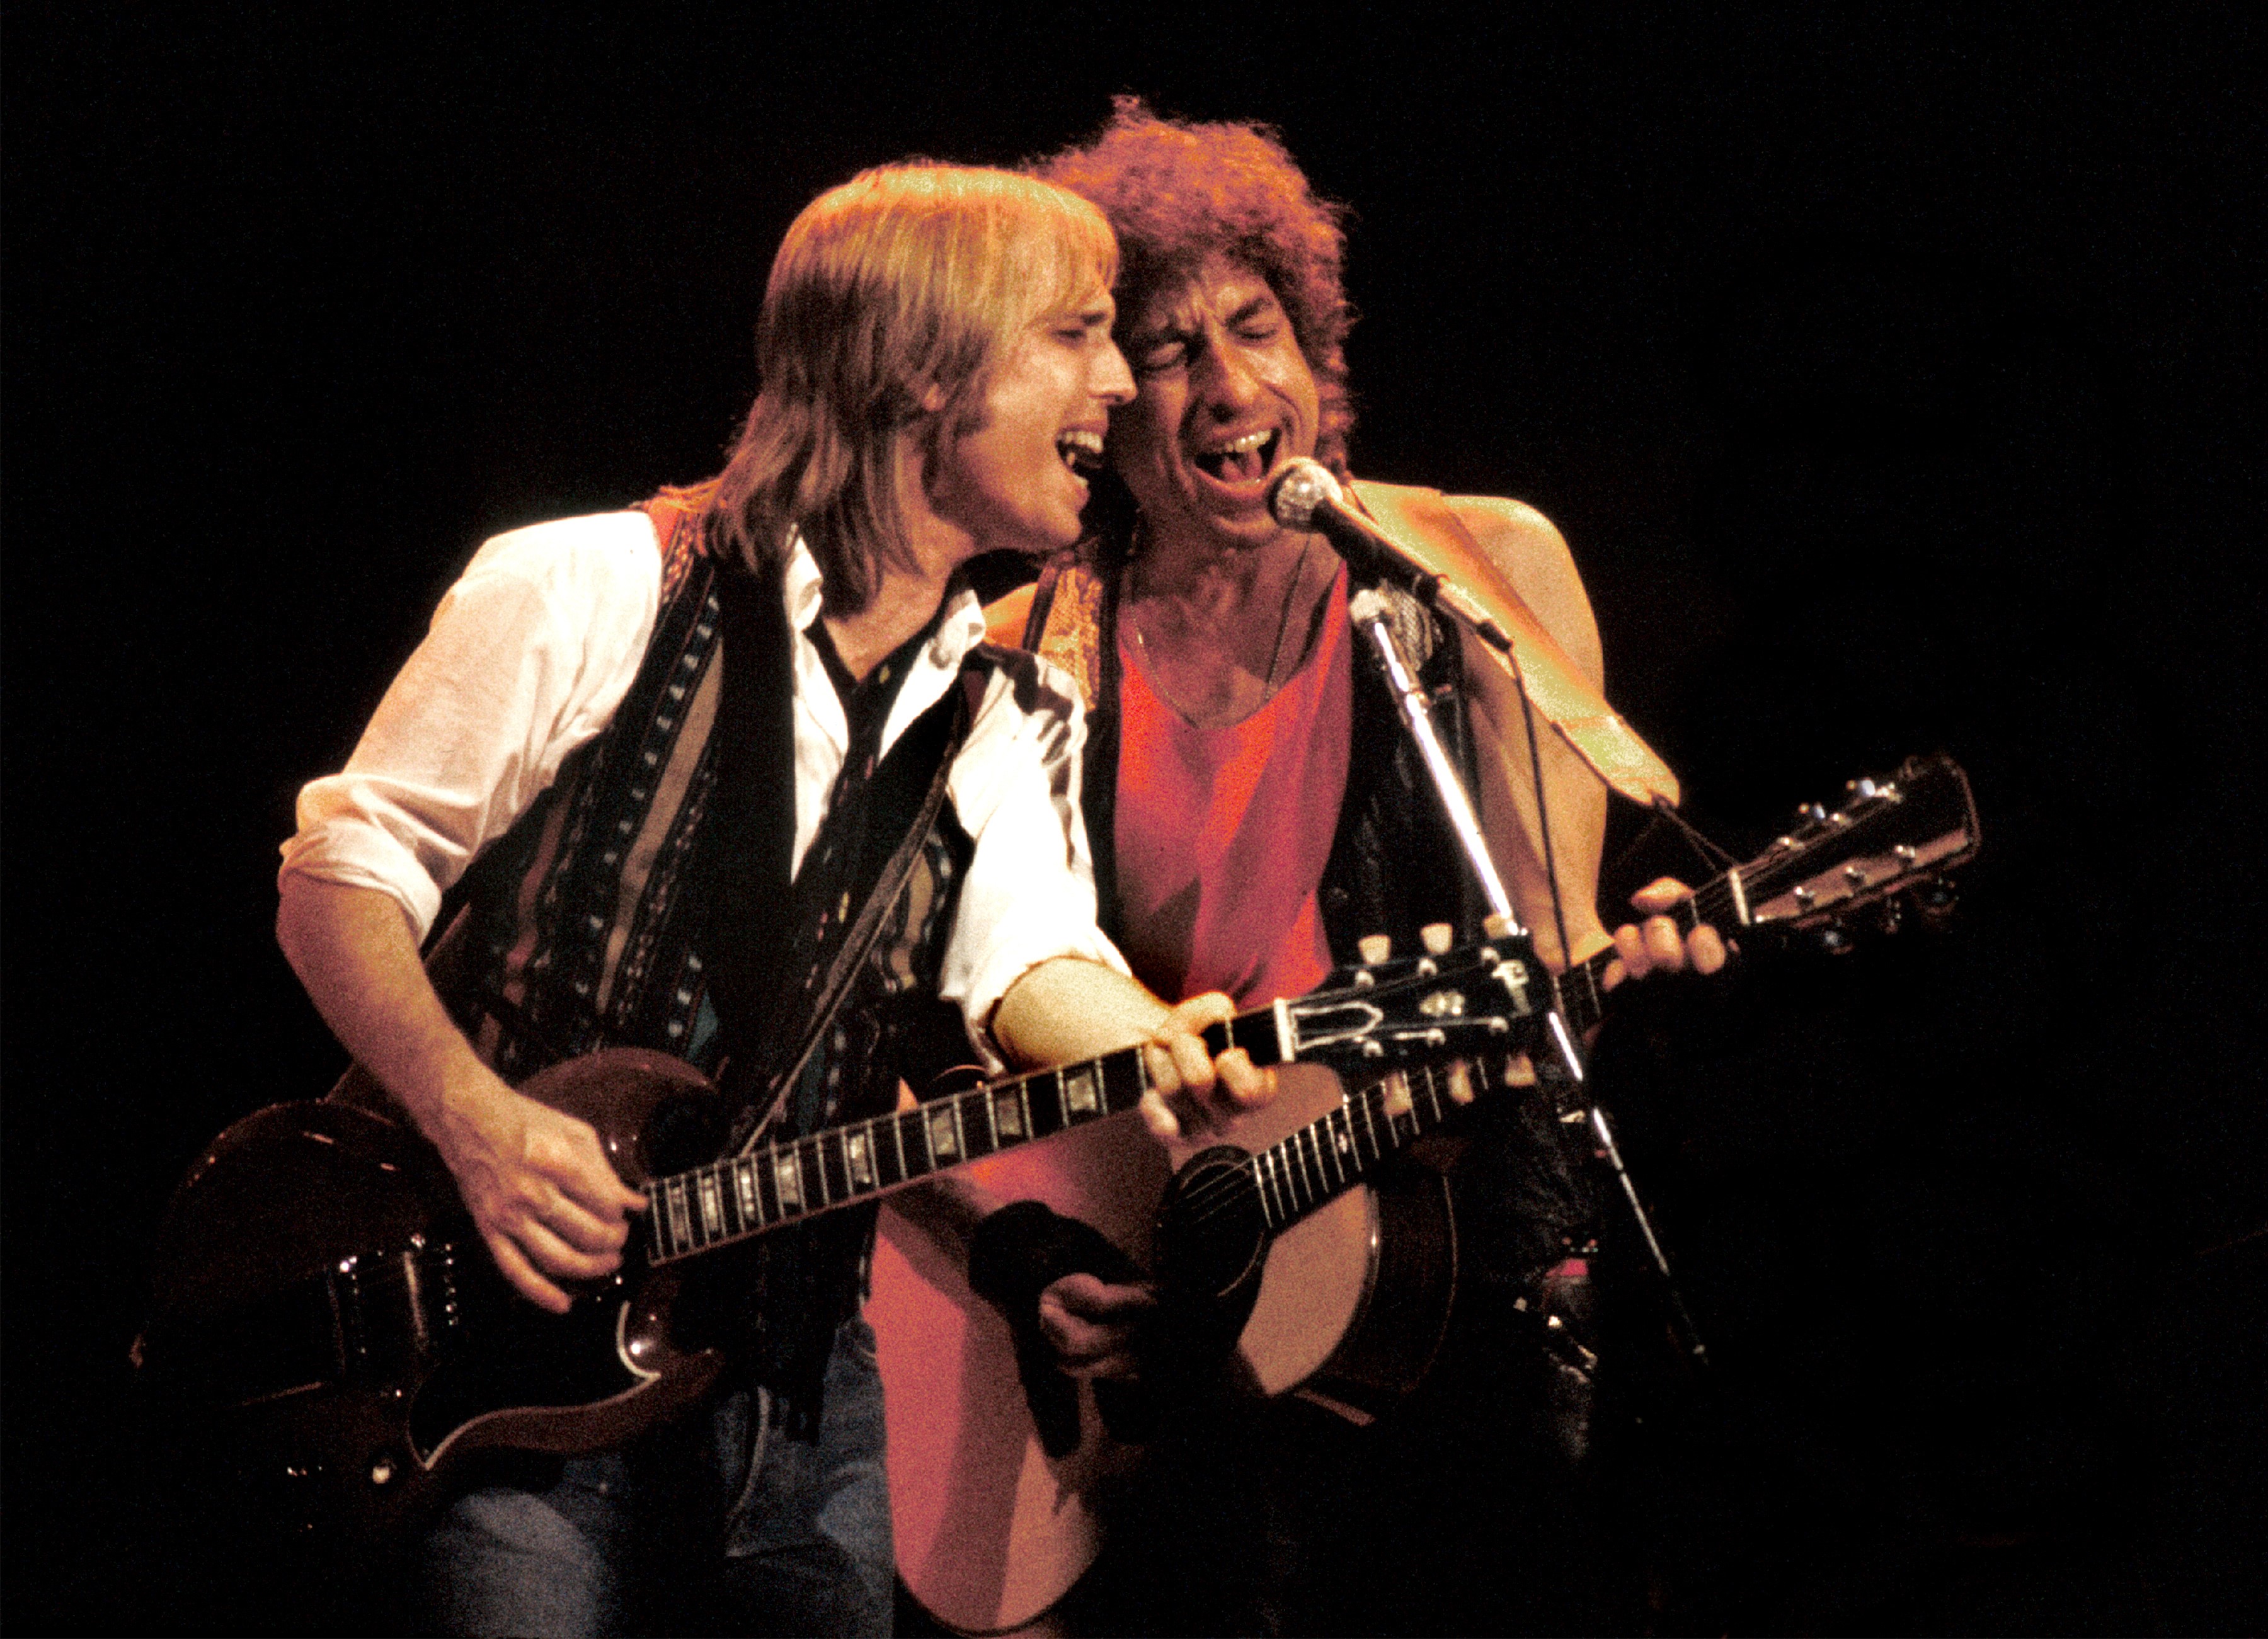 Tom Petty and Bob Dylan play guitar and sing into the same microphone.